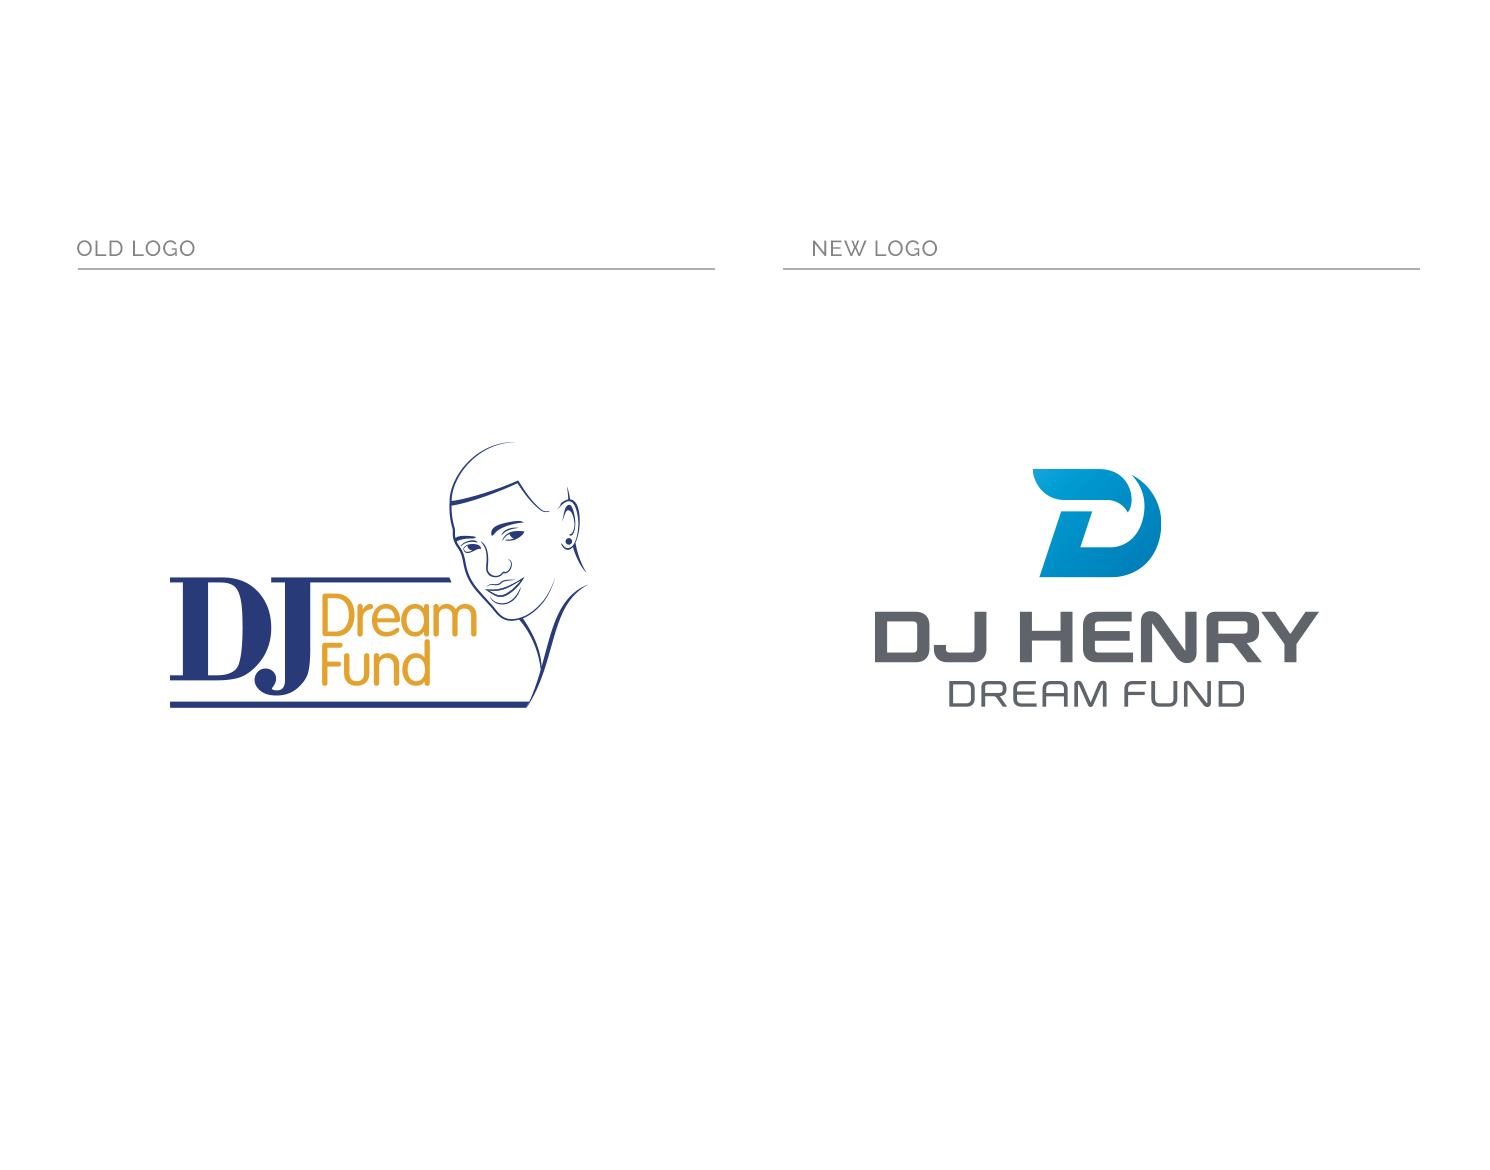 Before and after logo redesign for DJ Henry Dream Fund